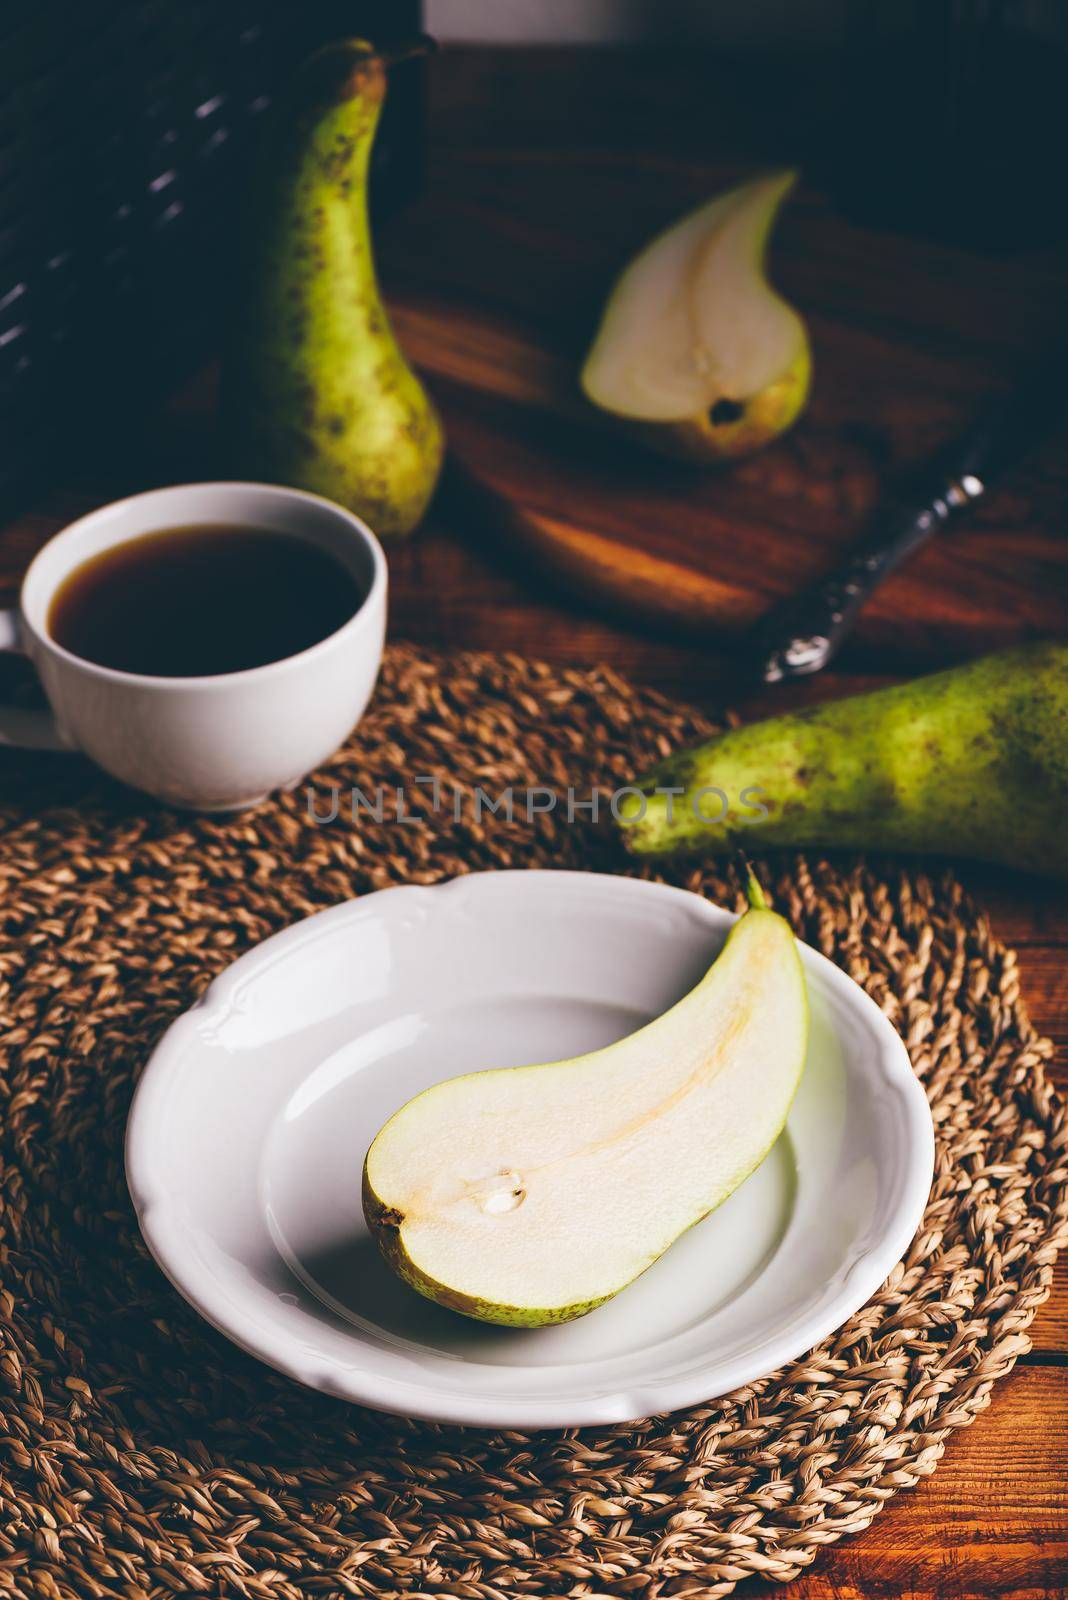 Half of Green Pear on White Plate and Cup of Coffee